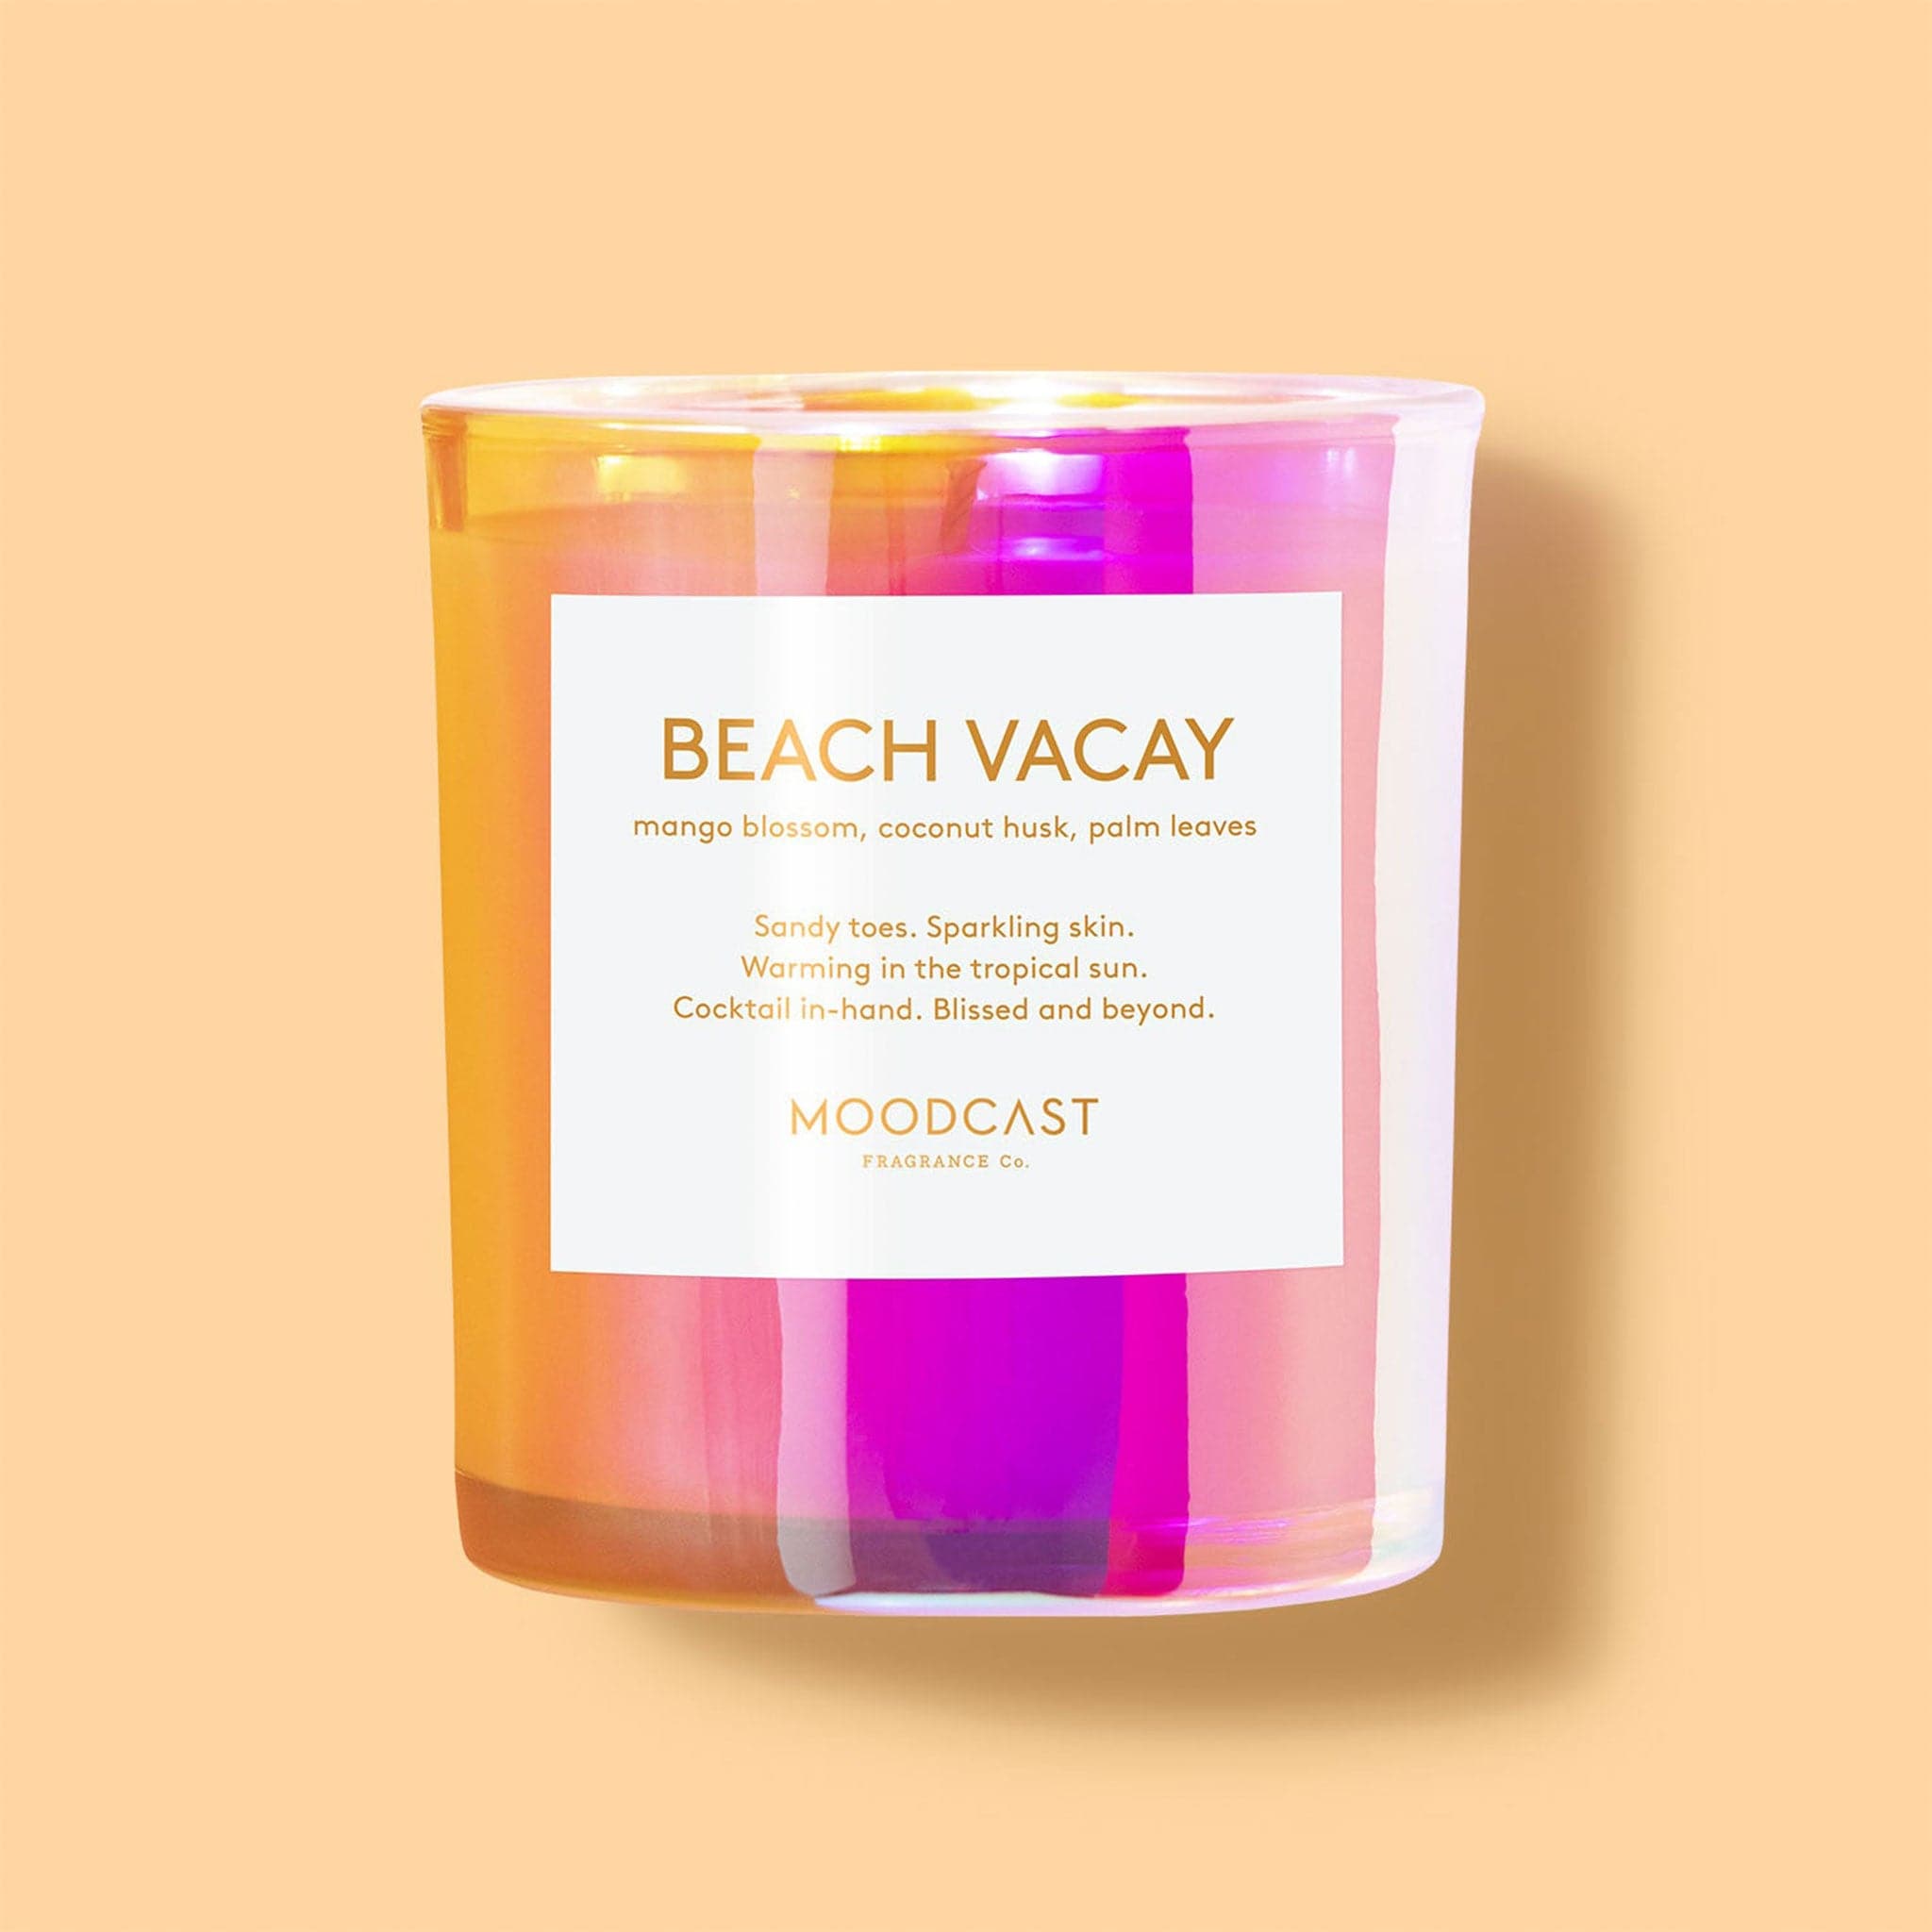 An orange and vibrant pink iridescent glass jar filled with a candle along with a white square label on the front that repeats the notes of the candle as well as the name, &quot;Beach Vacay&quot; in gold letters.